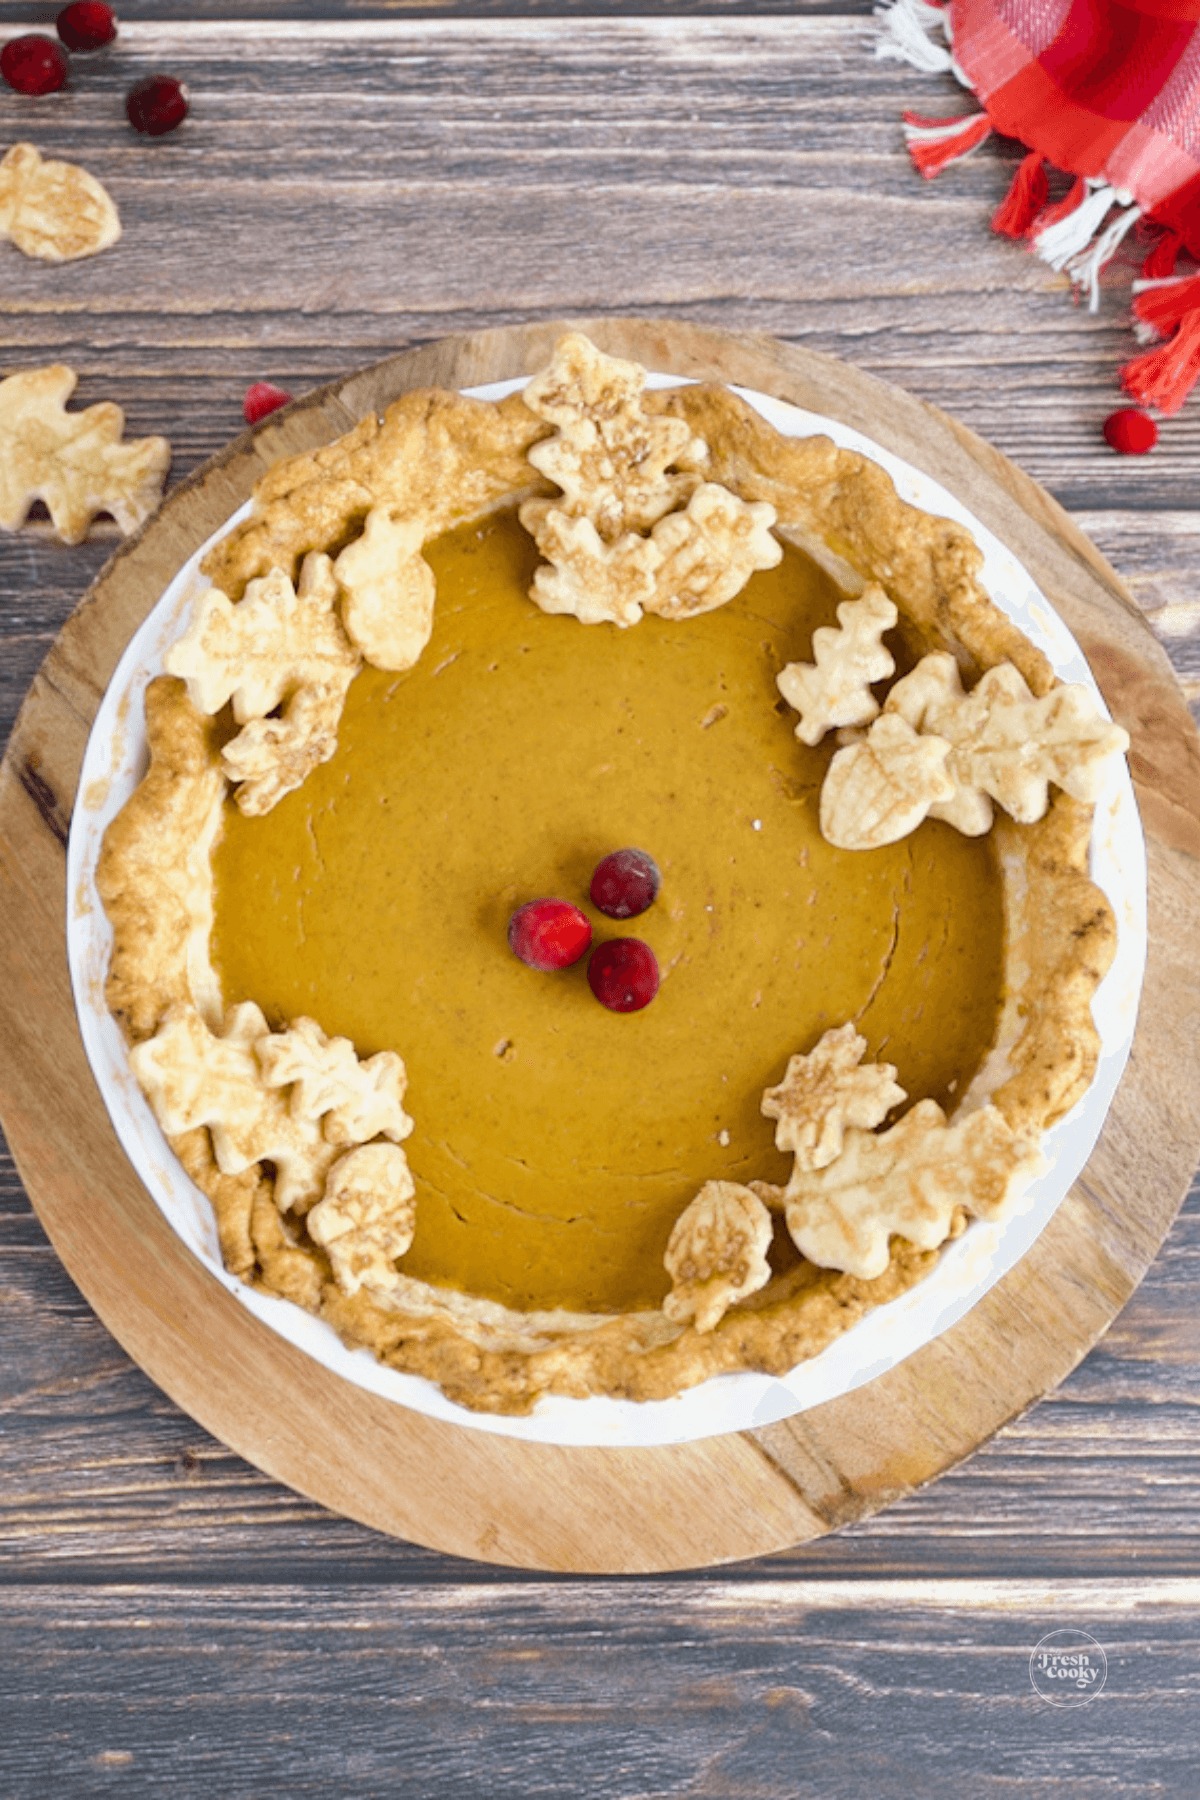 Decorated pumpkin custard pie with pastry leaves.